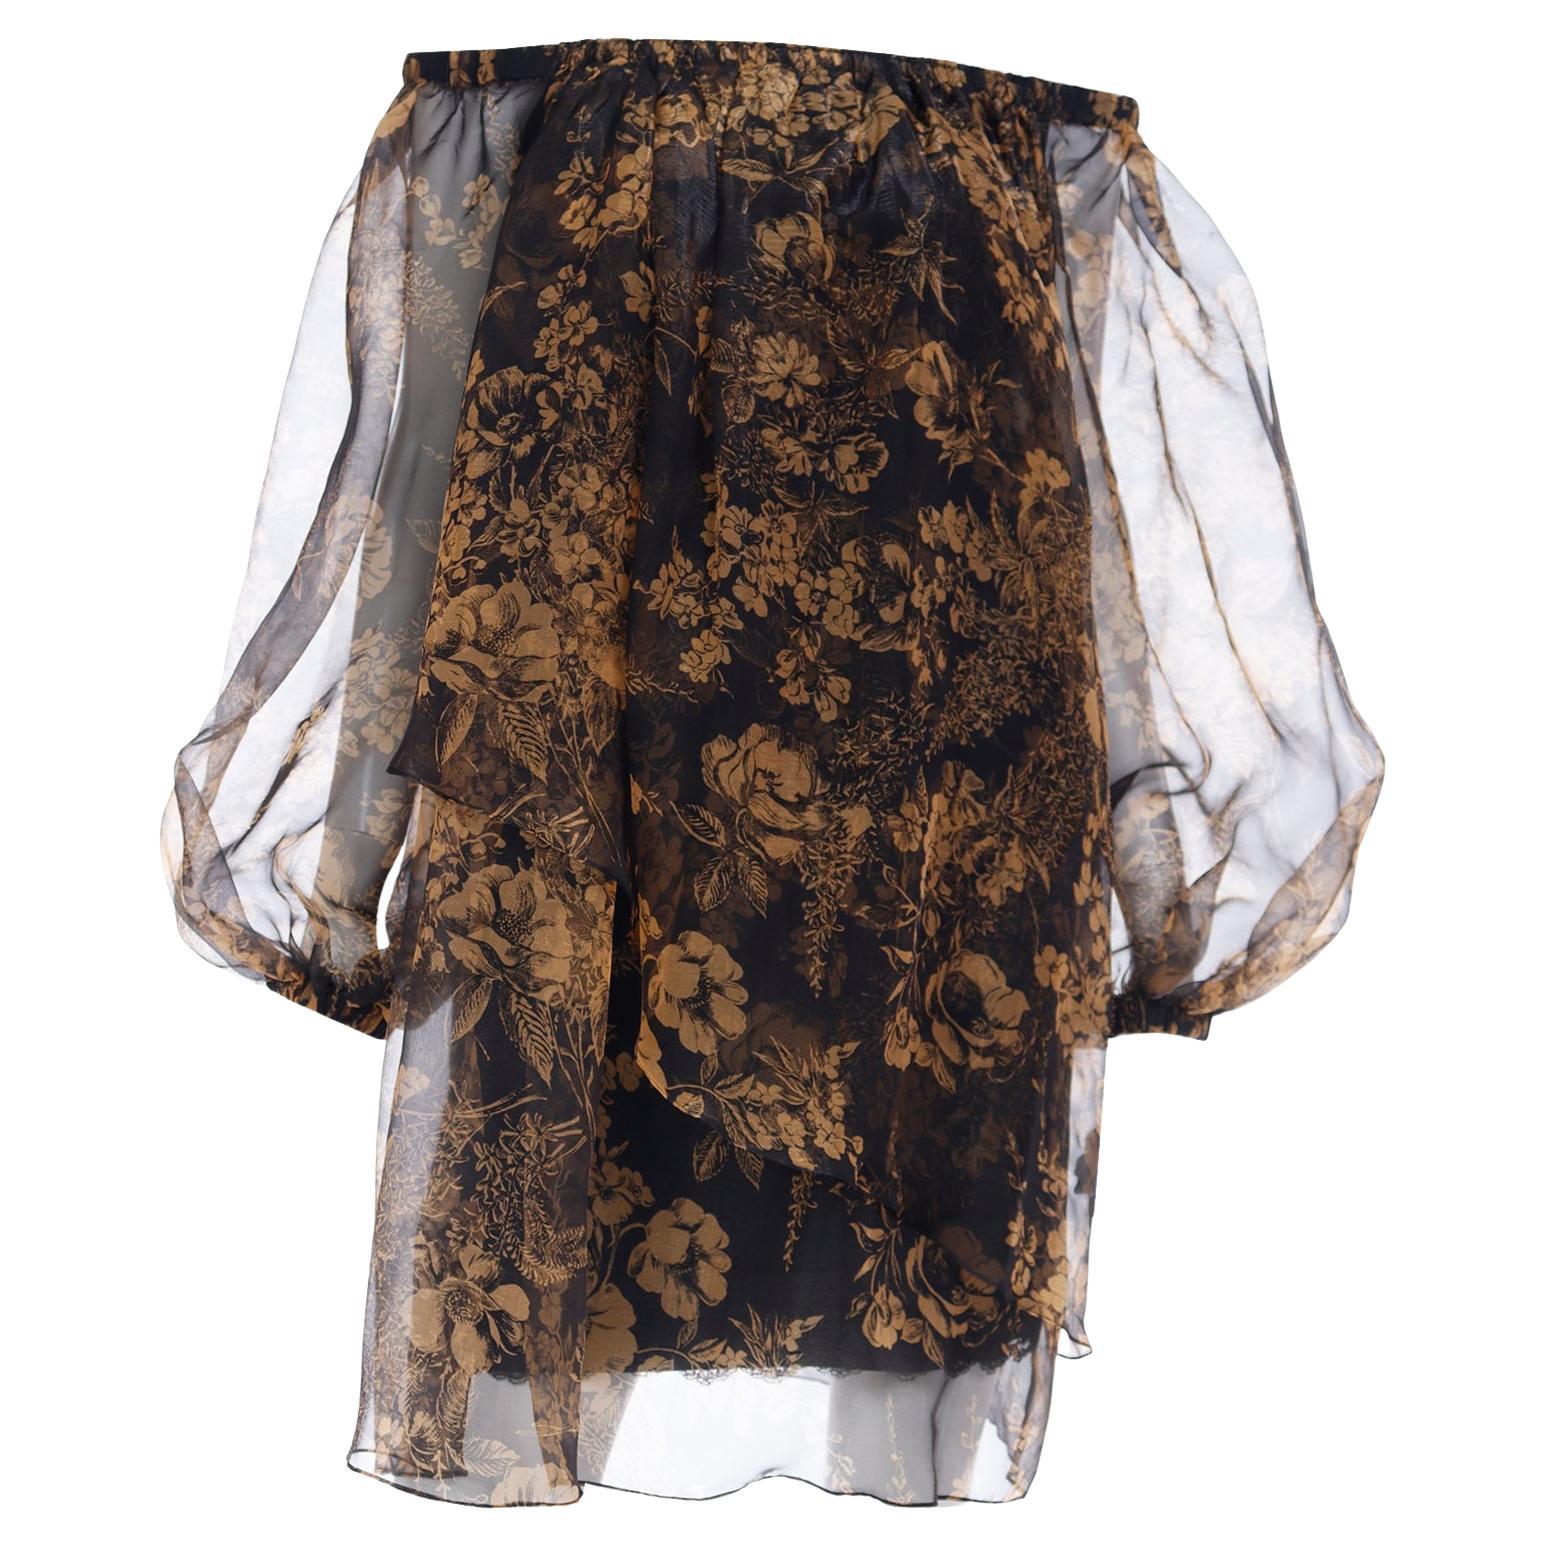 1990 Yves Saint Laurent Black and Gold Chiffon Dress With Sheer Balloon Sleeves For Sale